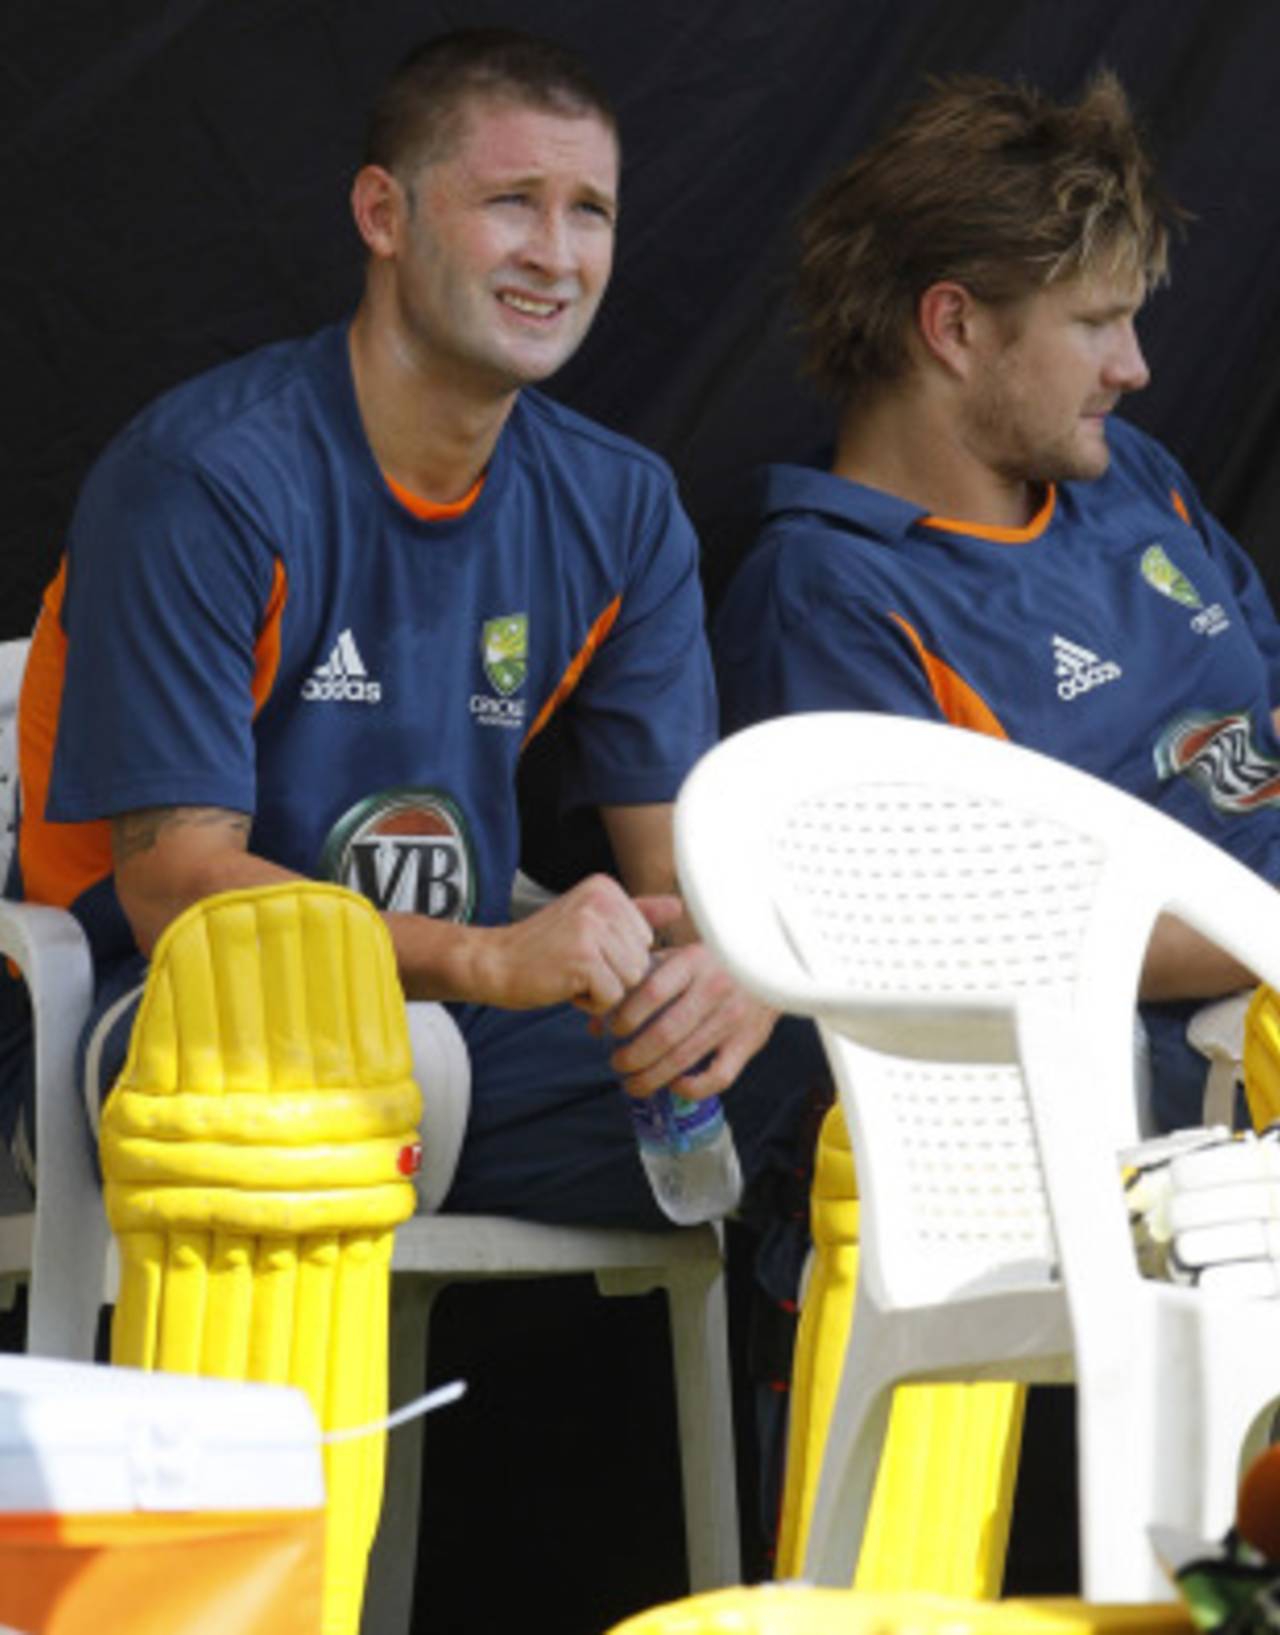 Michael Clarke and Shane Watson await their turn to bat during practice, Ahmedabad, March 22, 2011